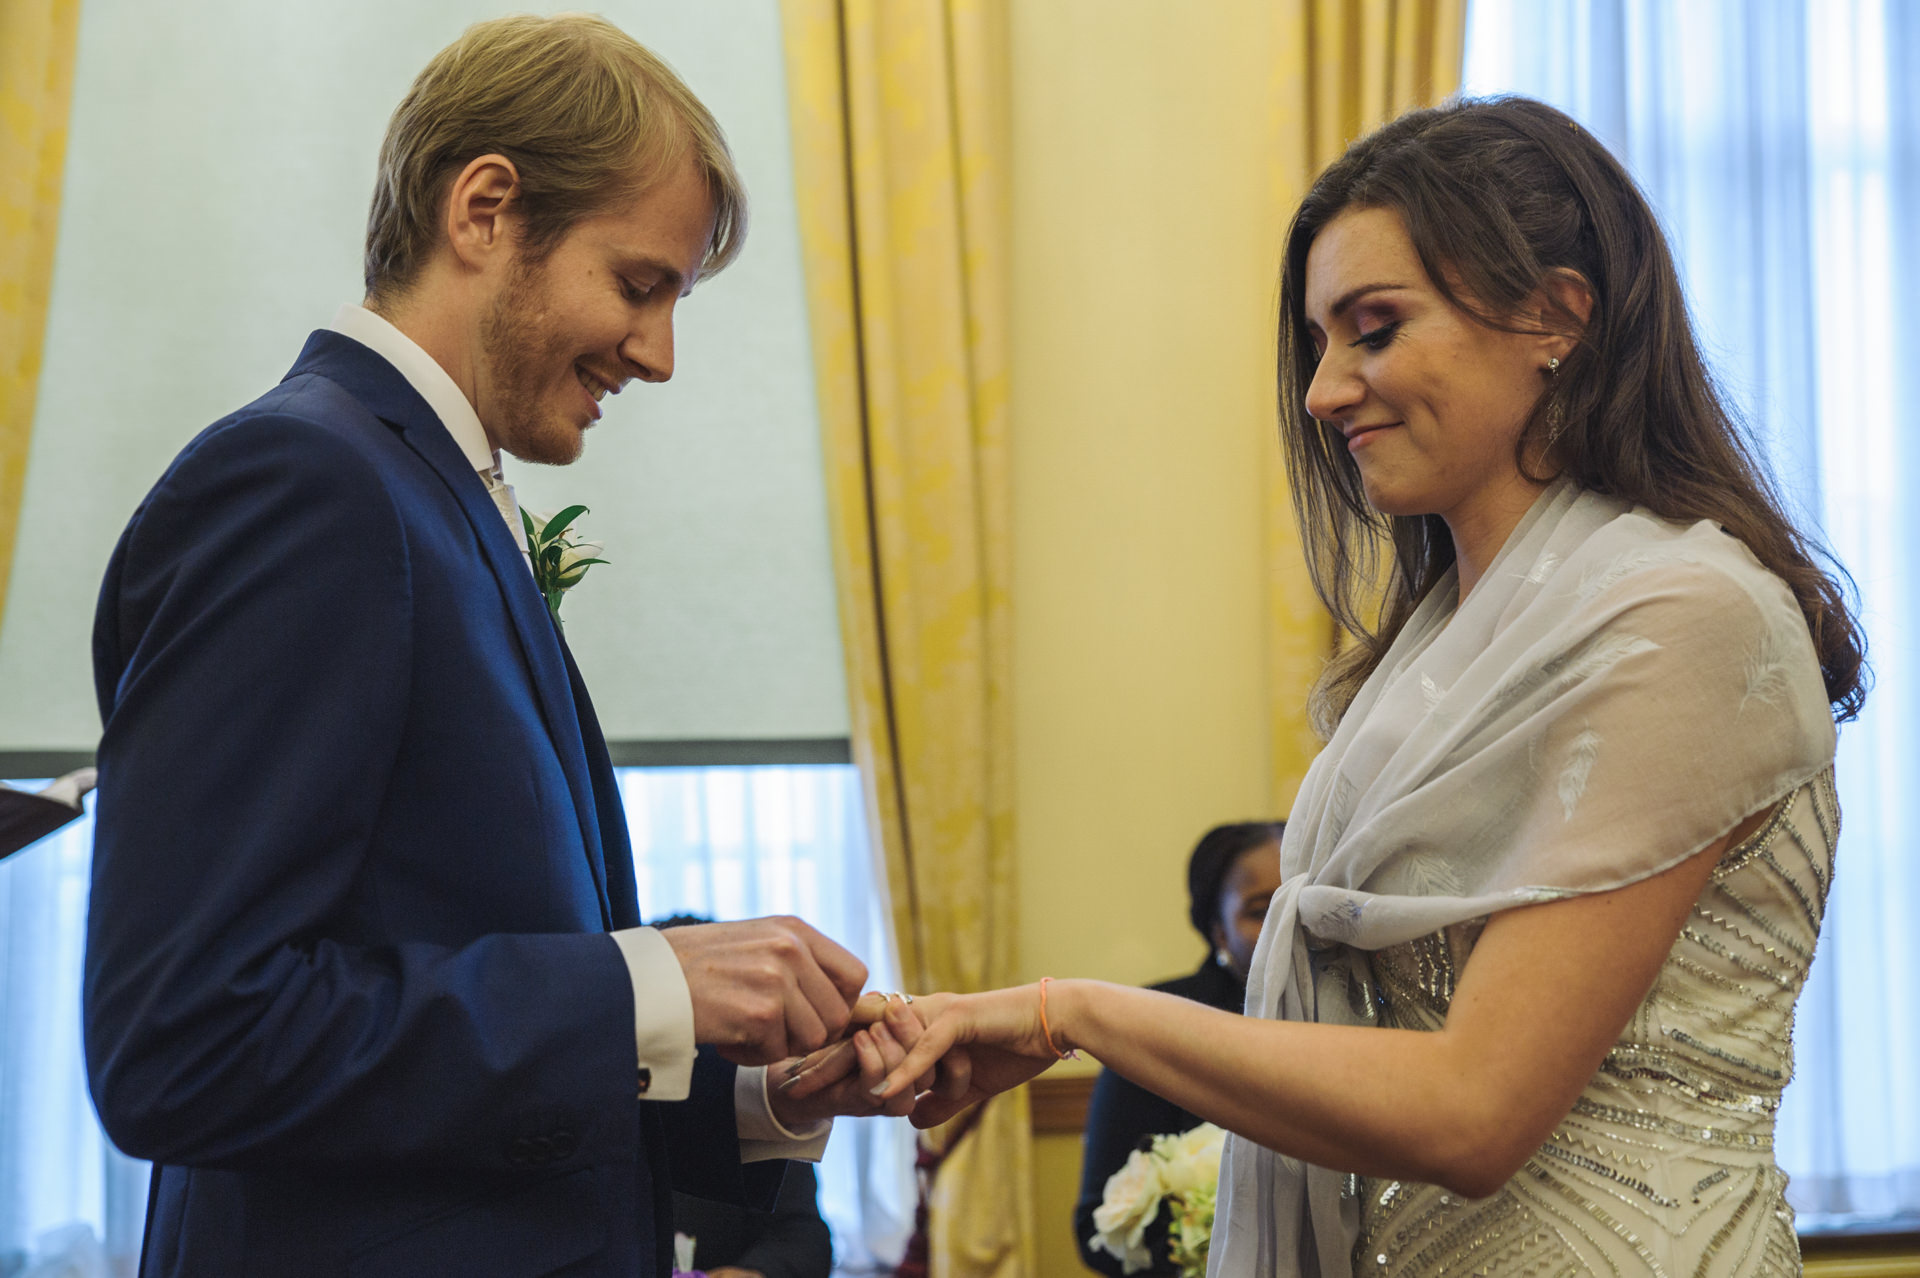 islington town hall wedding groom and bride exchanges the rings